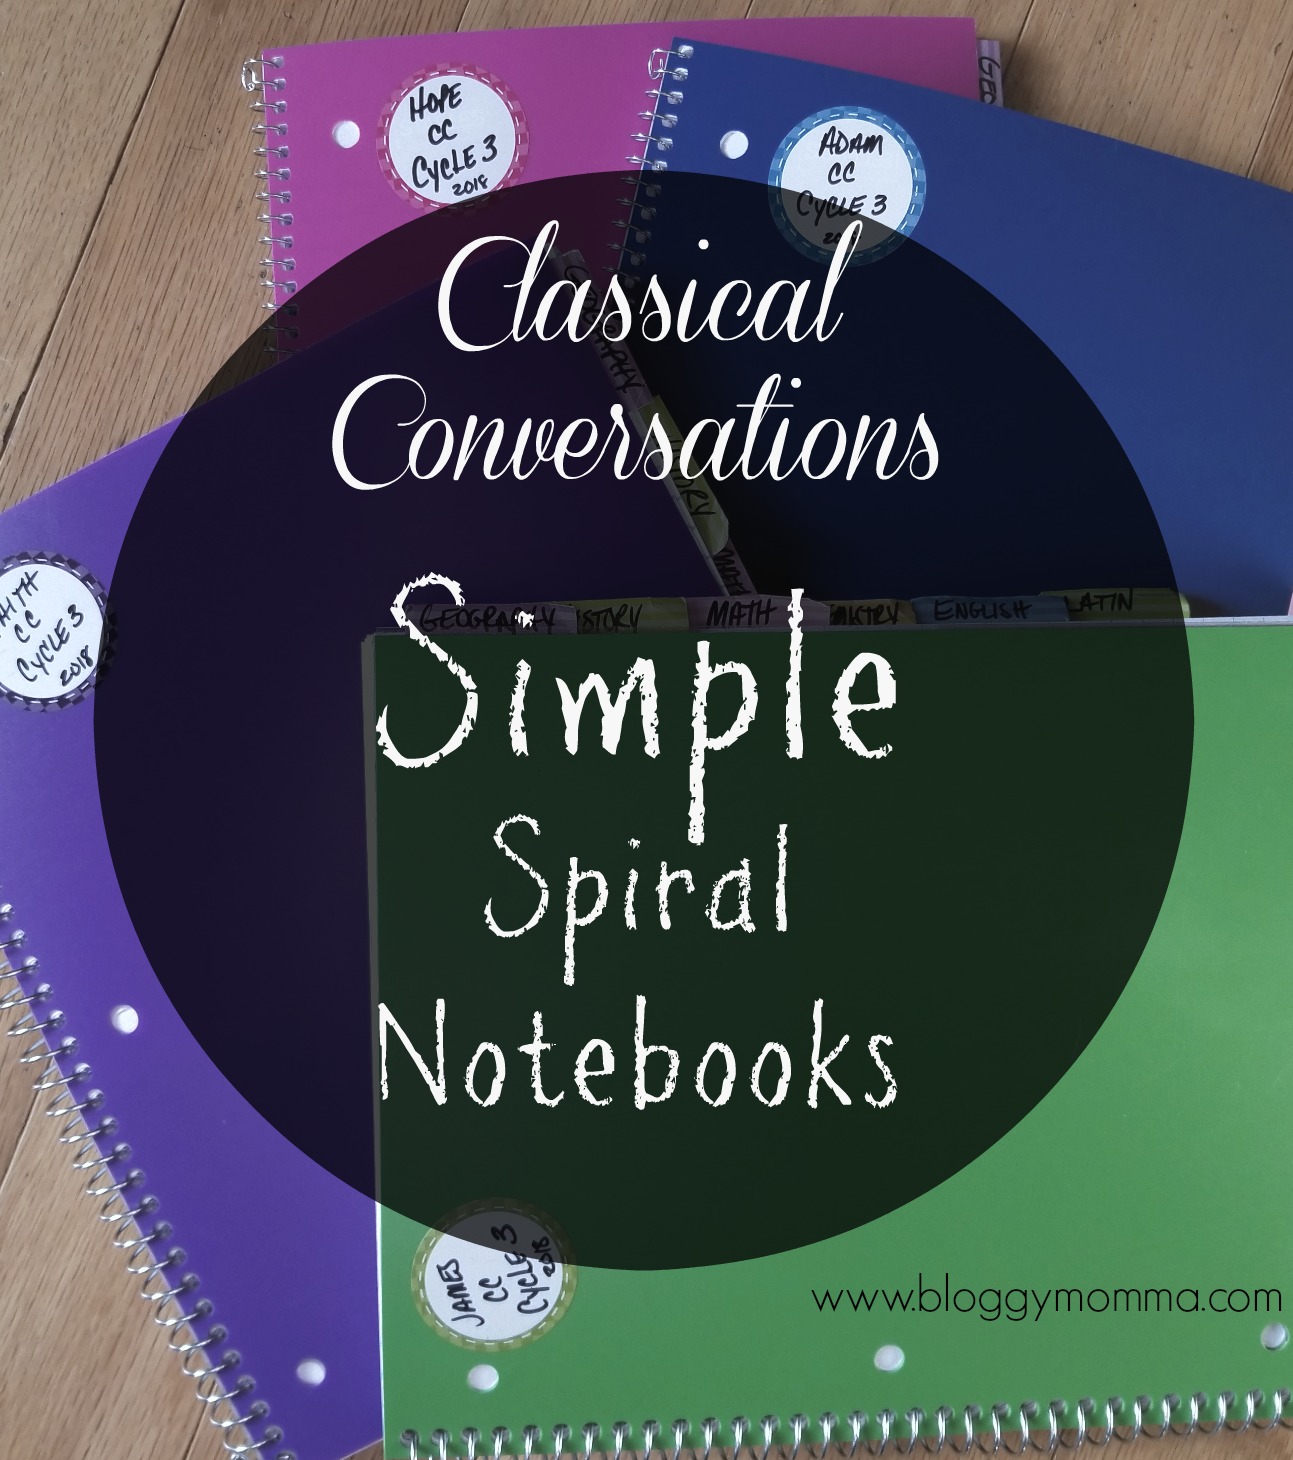 Simple Classical Conversations Spiral Notebooks